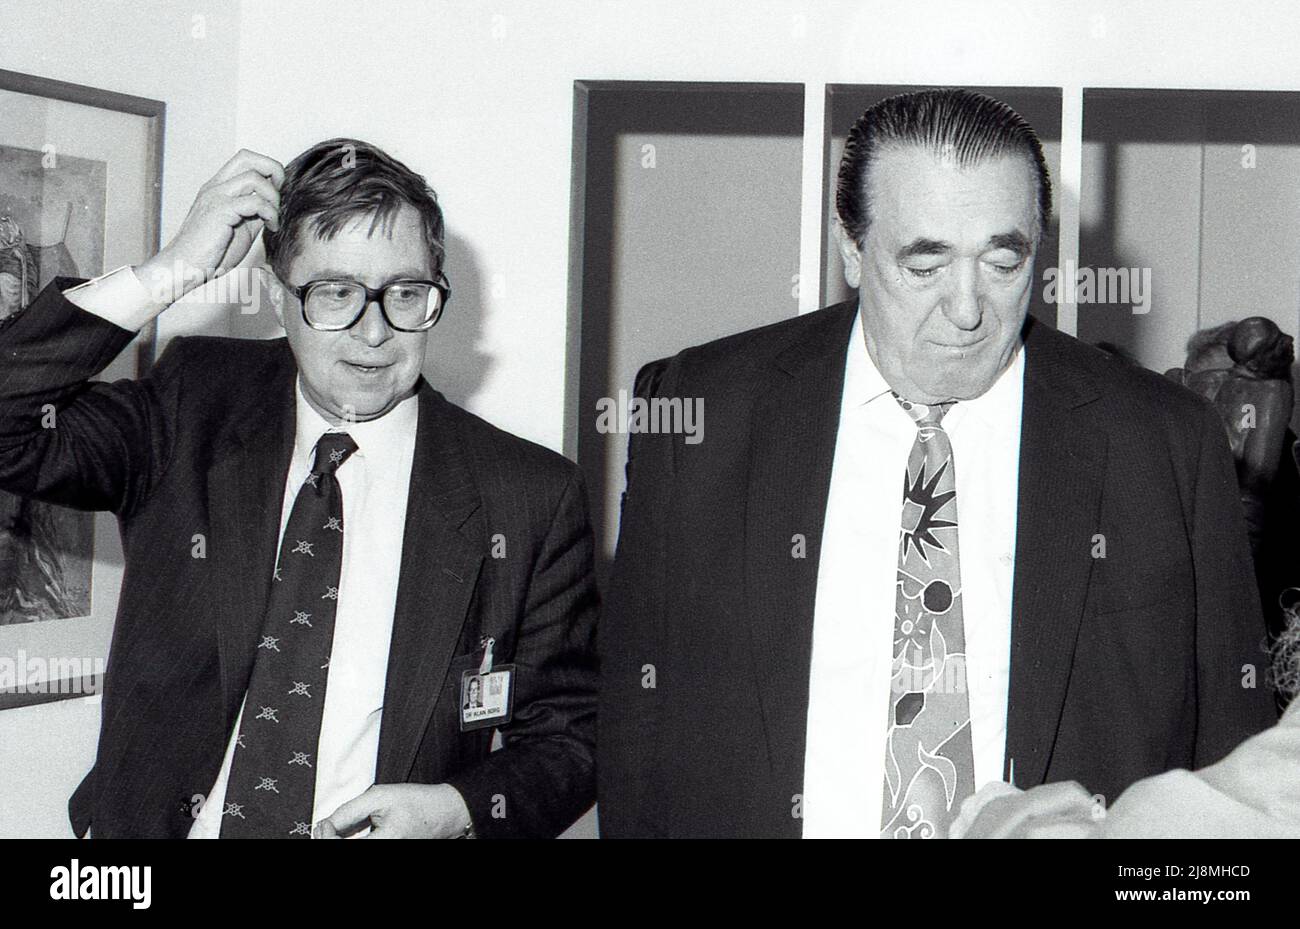 Dr. Alan Borg (left), Director General of the Imperial War Museum, attends a press event with Robert Maxwell, Chairman of Mirror Group Newspapers, at the Imperial War Museum in London, England on April 17, 1991. Stock Photo